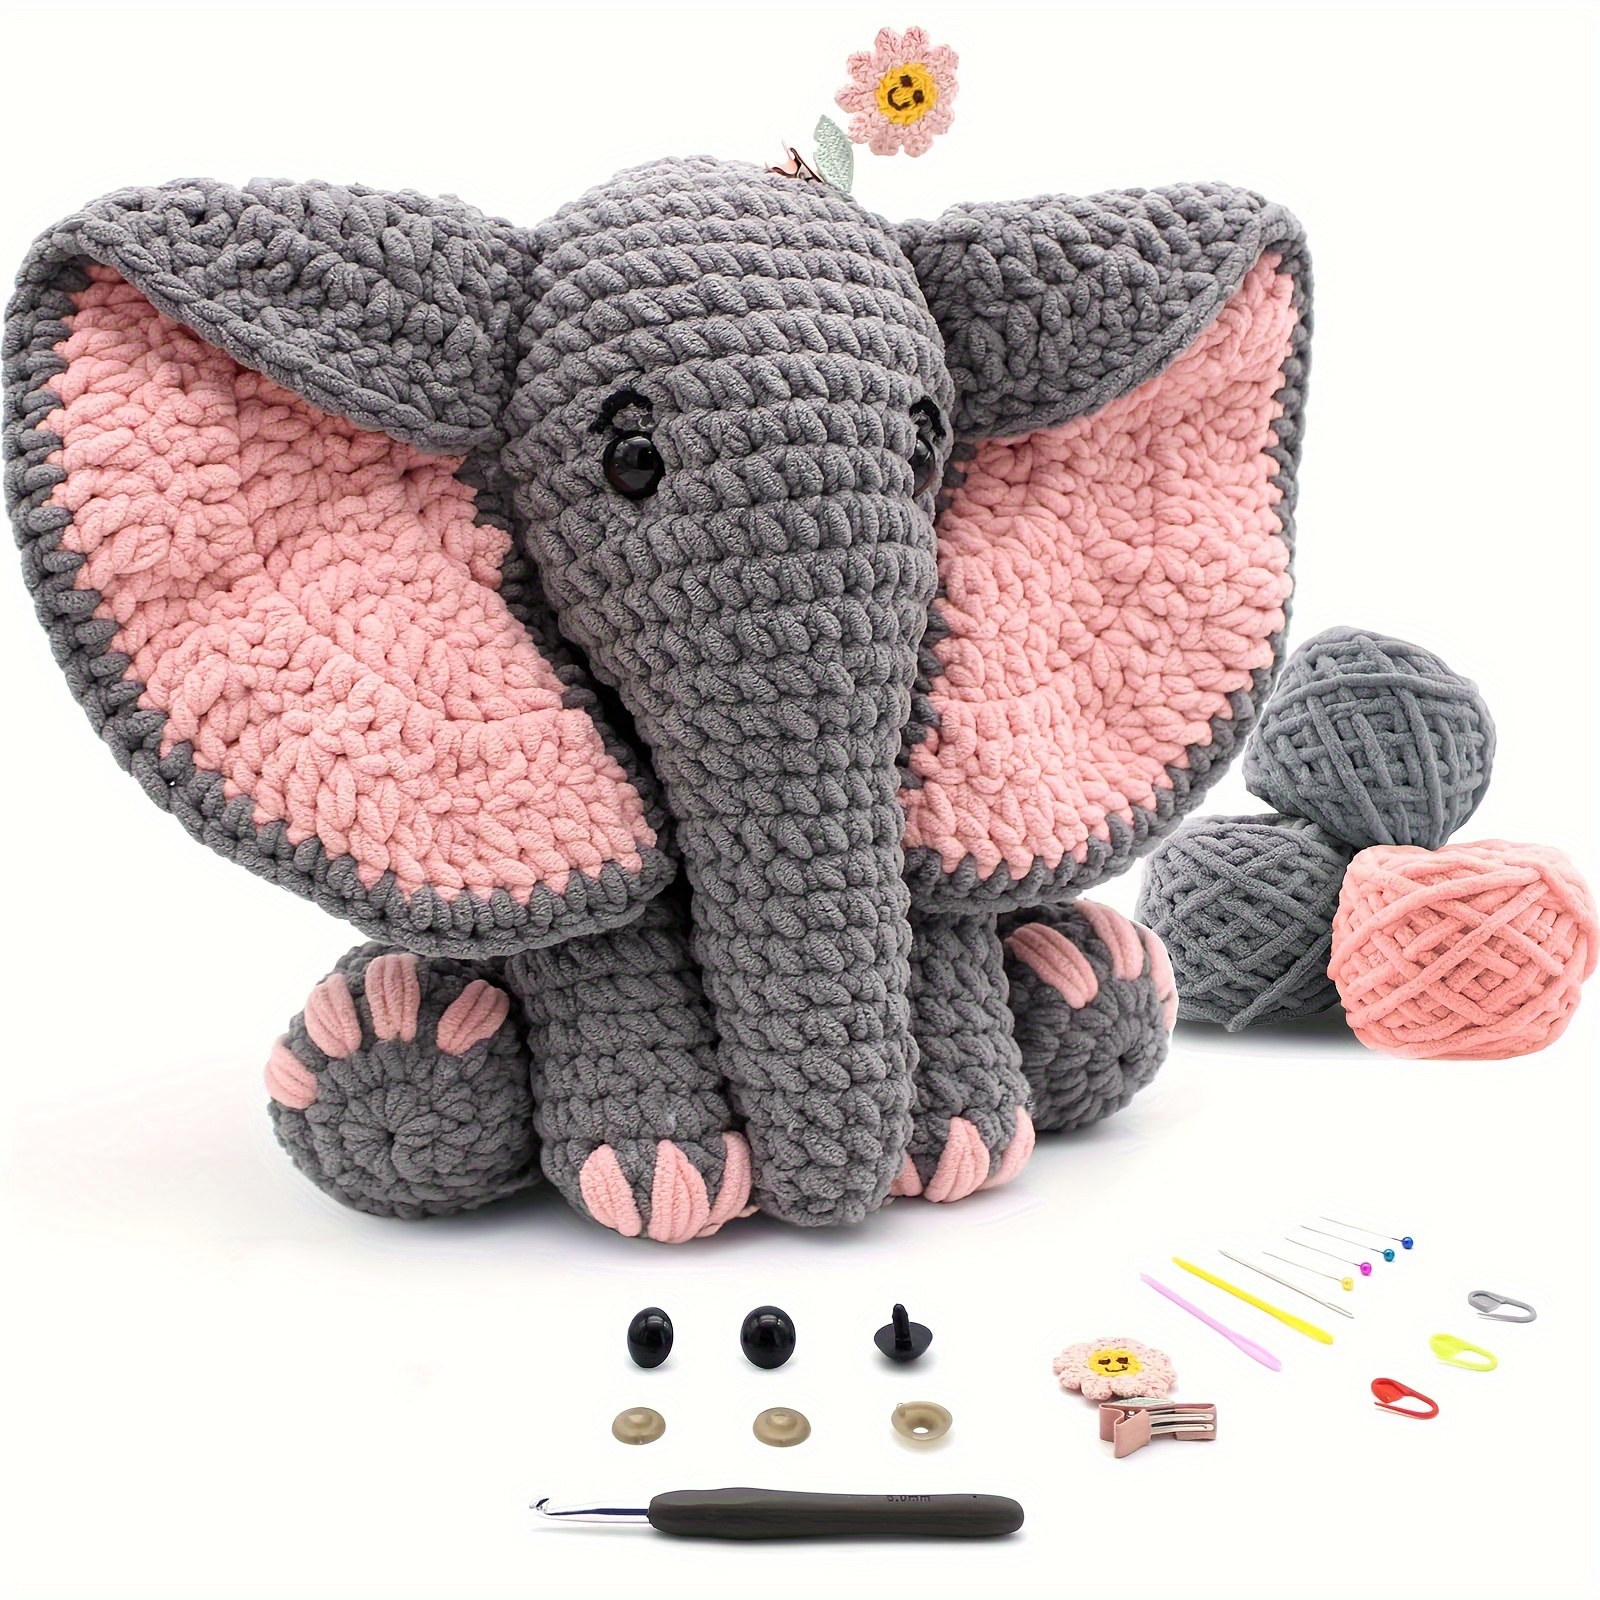 

Beginner Crochet Kit, 13in Elephant Design, Includes Yarn & Step-by-step Video Tutorials, Perfect Gift For Adults, Craft Tools & Supplies